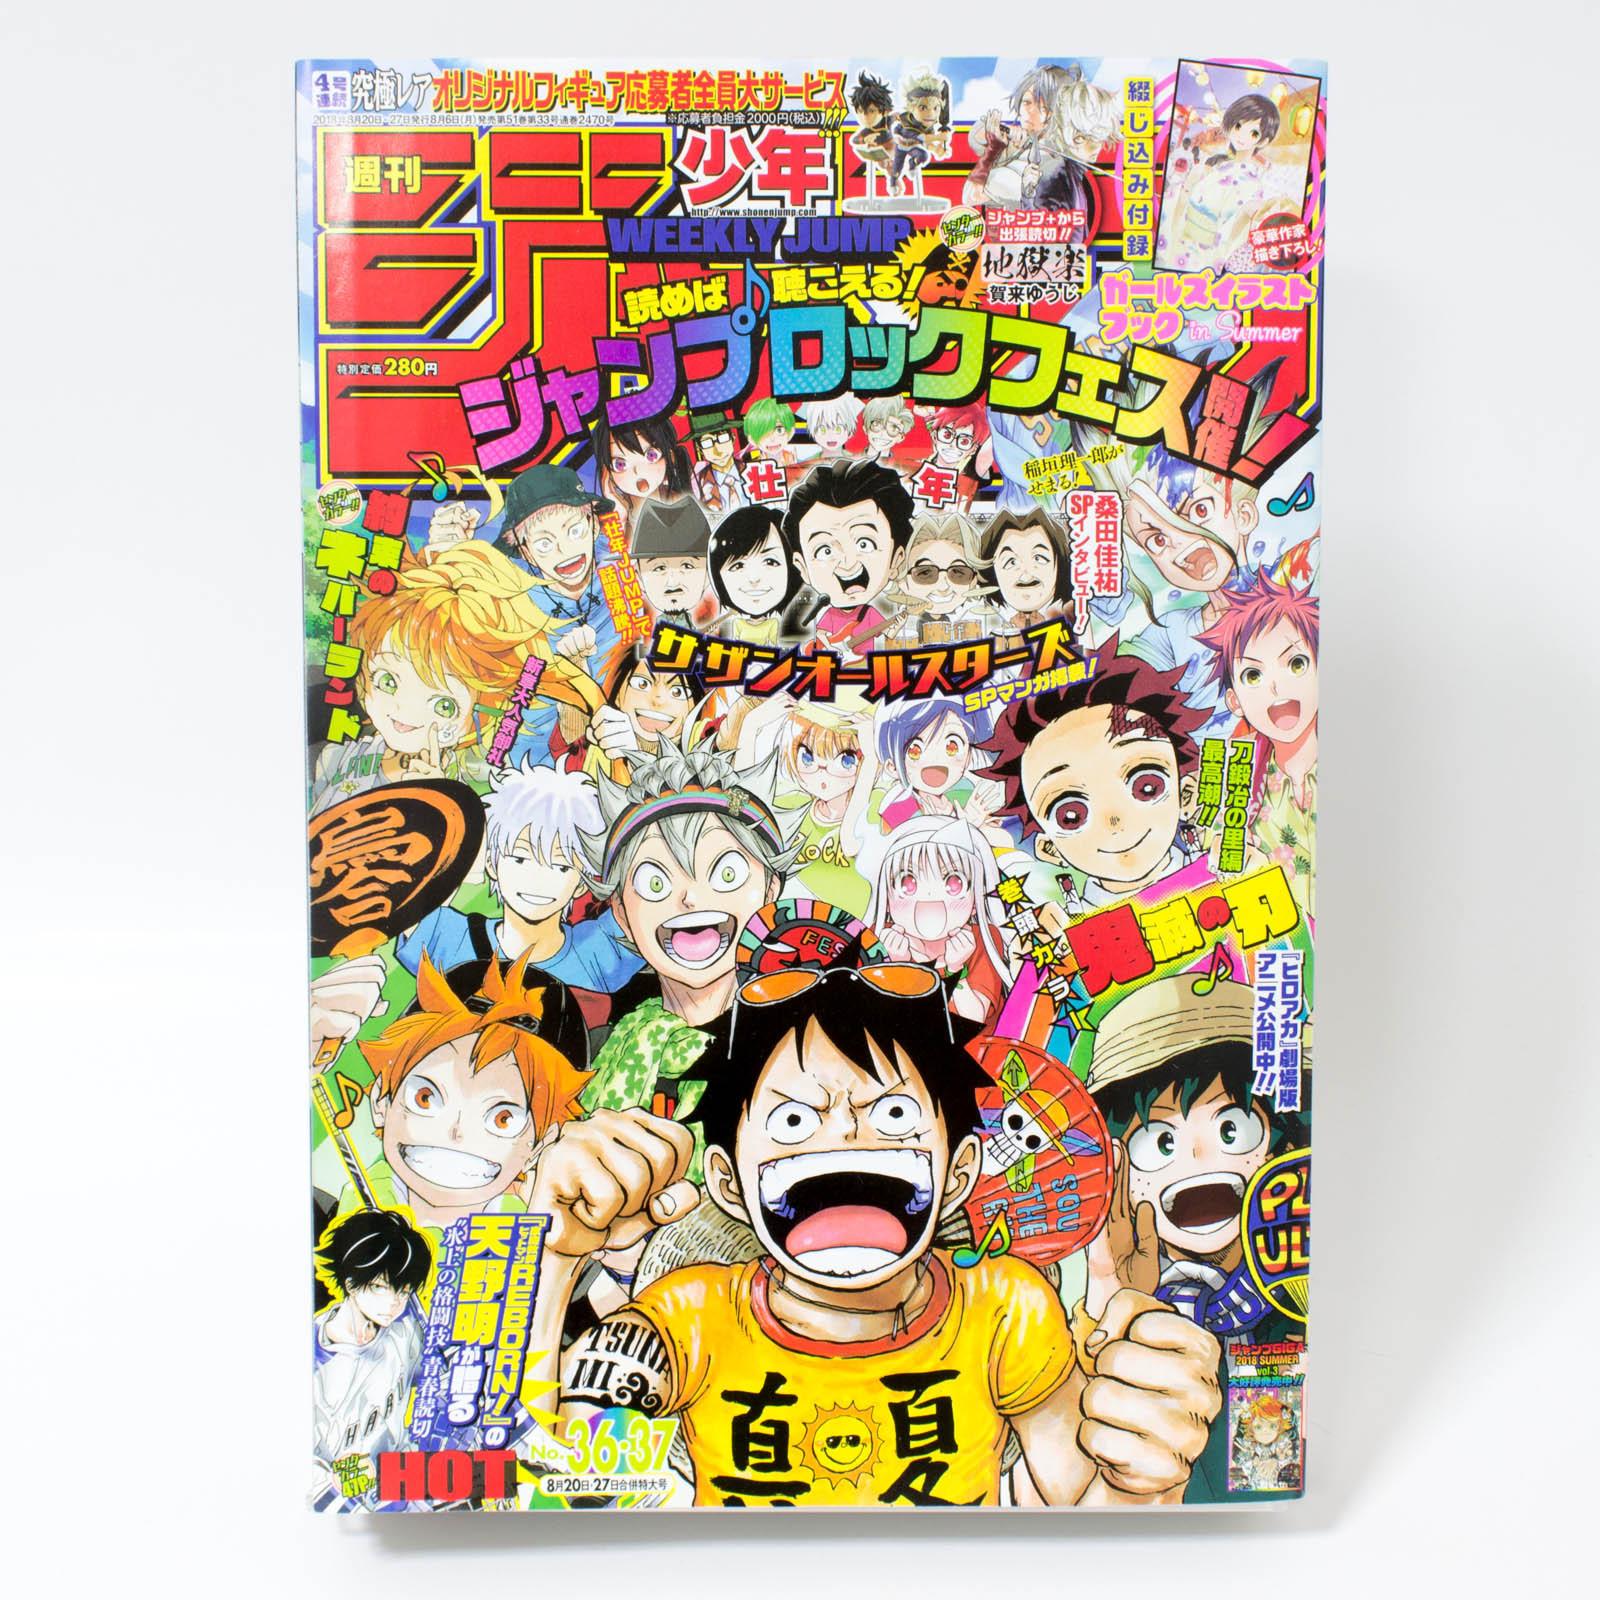 Weekly Shonen JUMP Vol.36-37 2018 (combined number) / Japanese